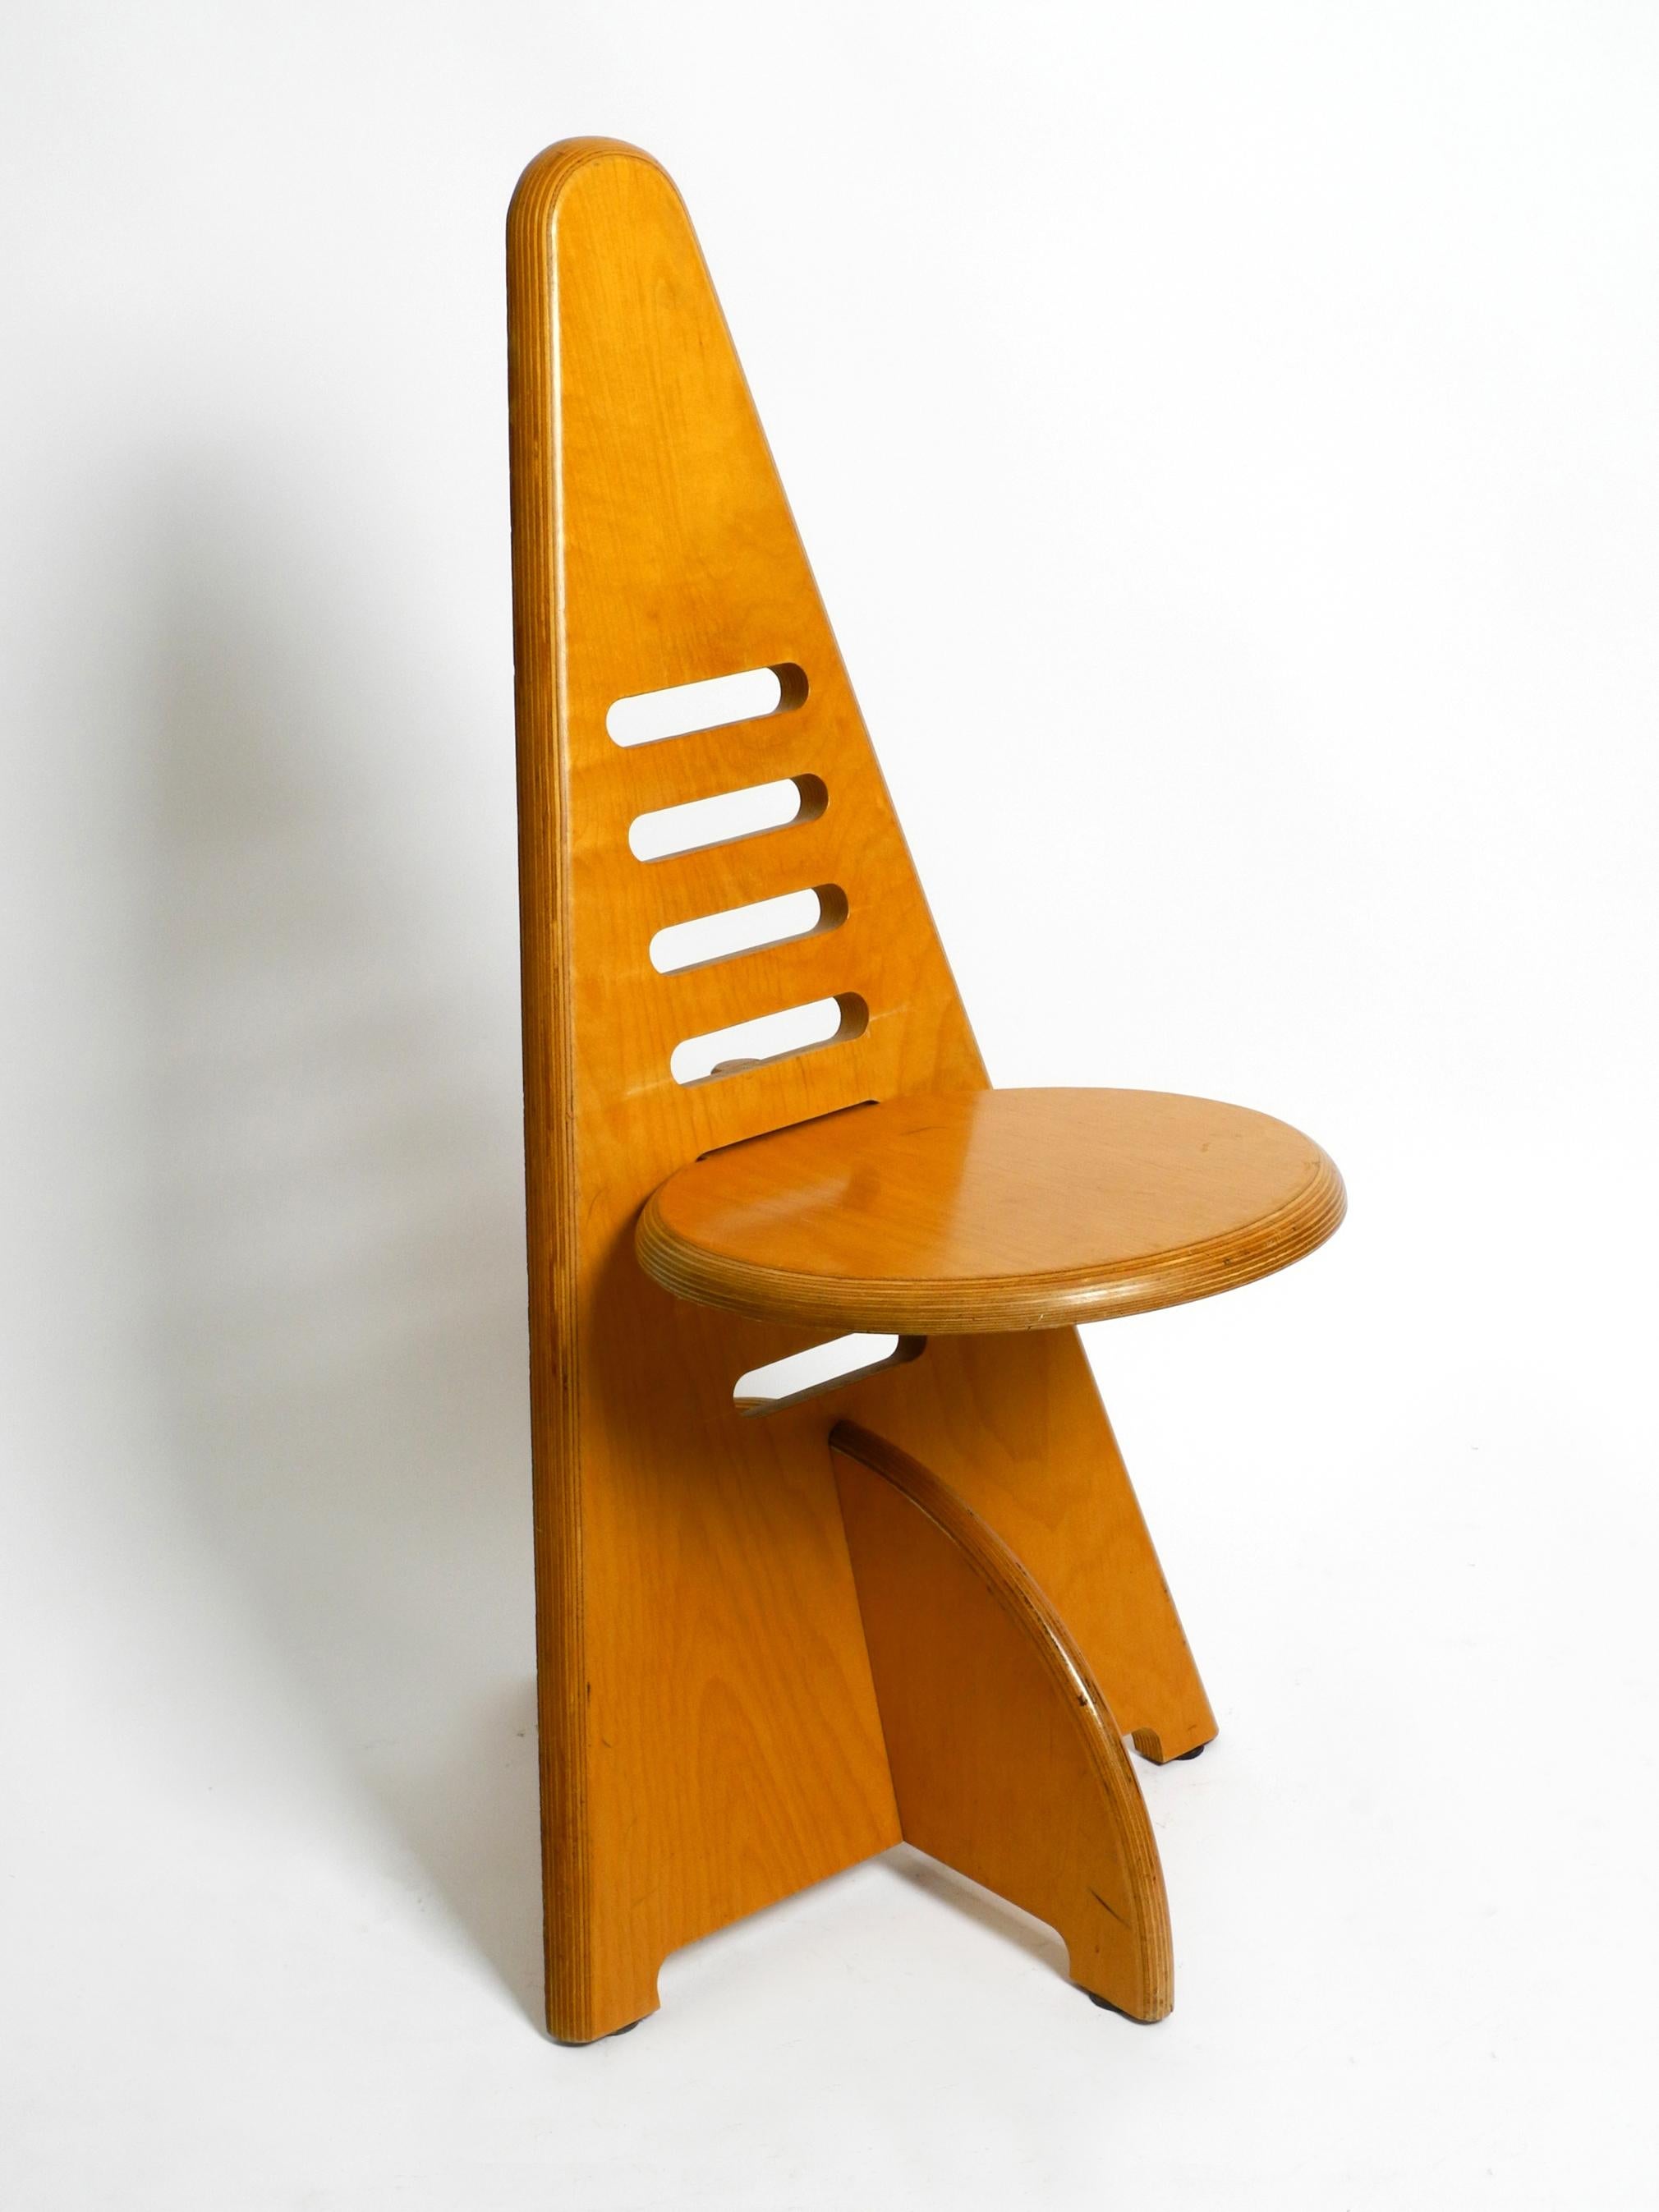 Beautiful 1970s Lundi Sit Chair Designed by Gijs Boelaars for Lundia Netherlands 9